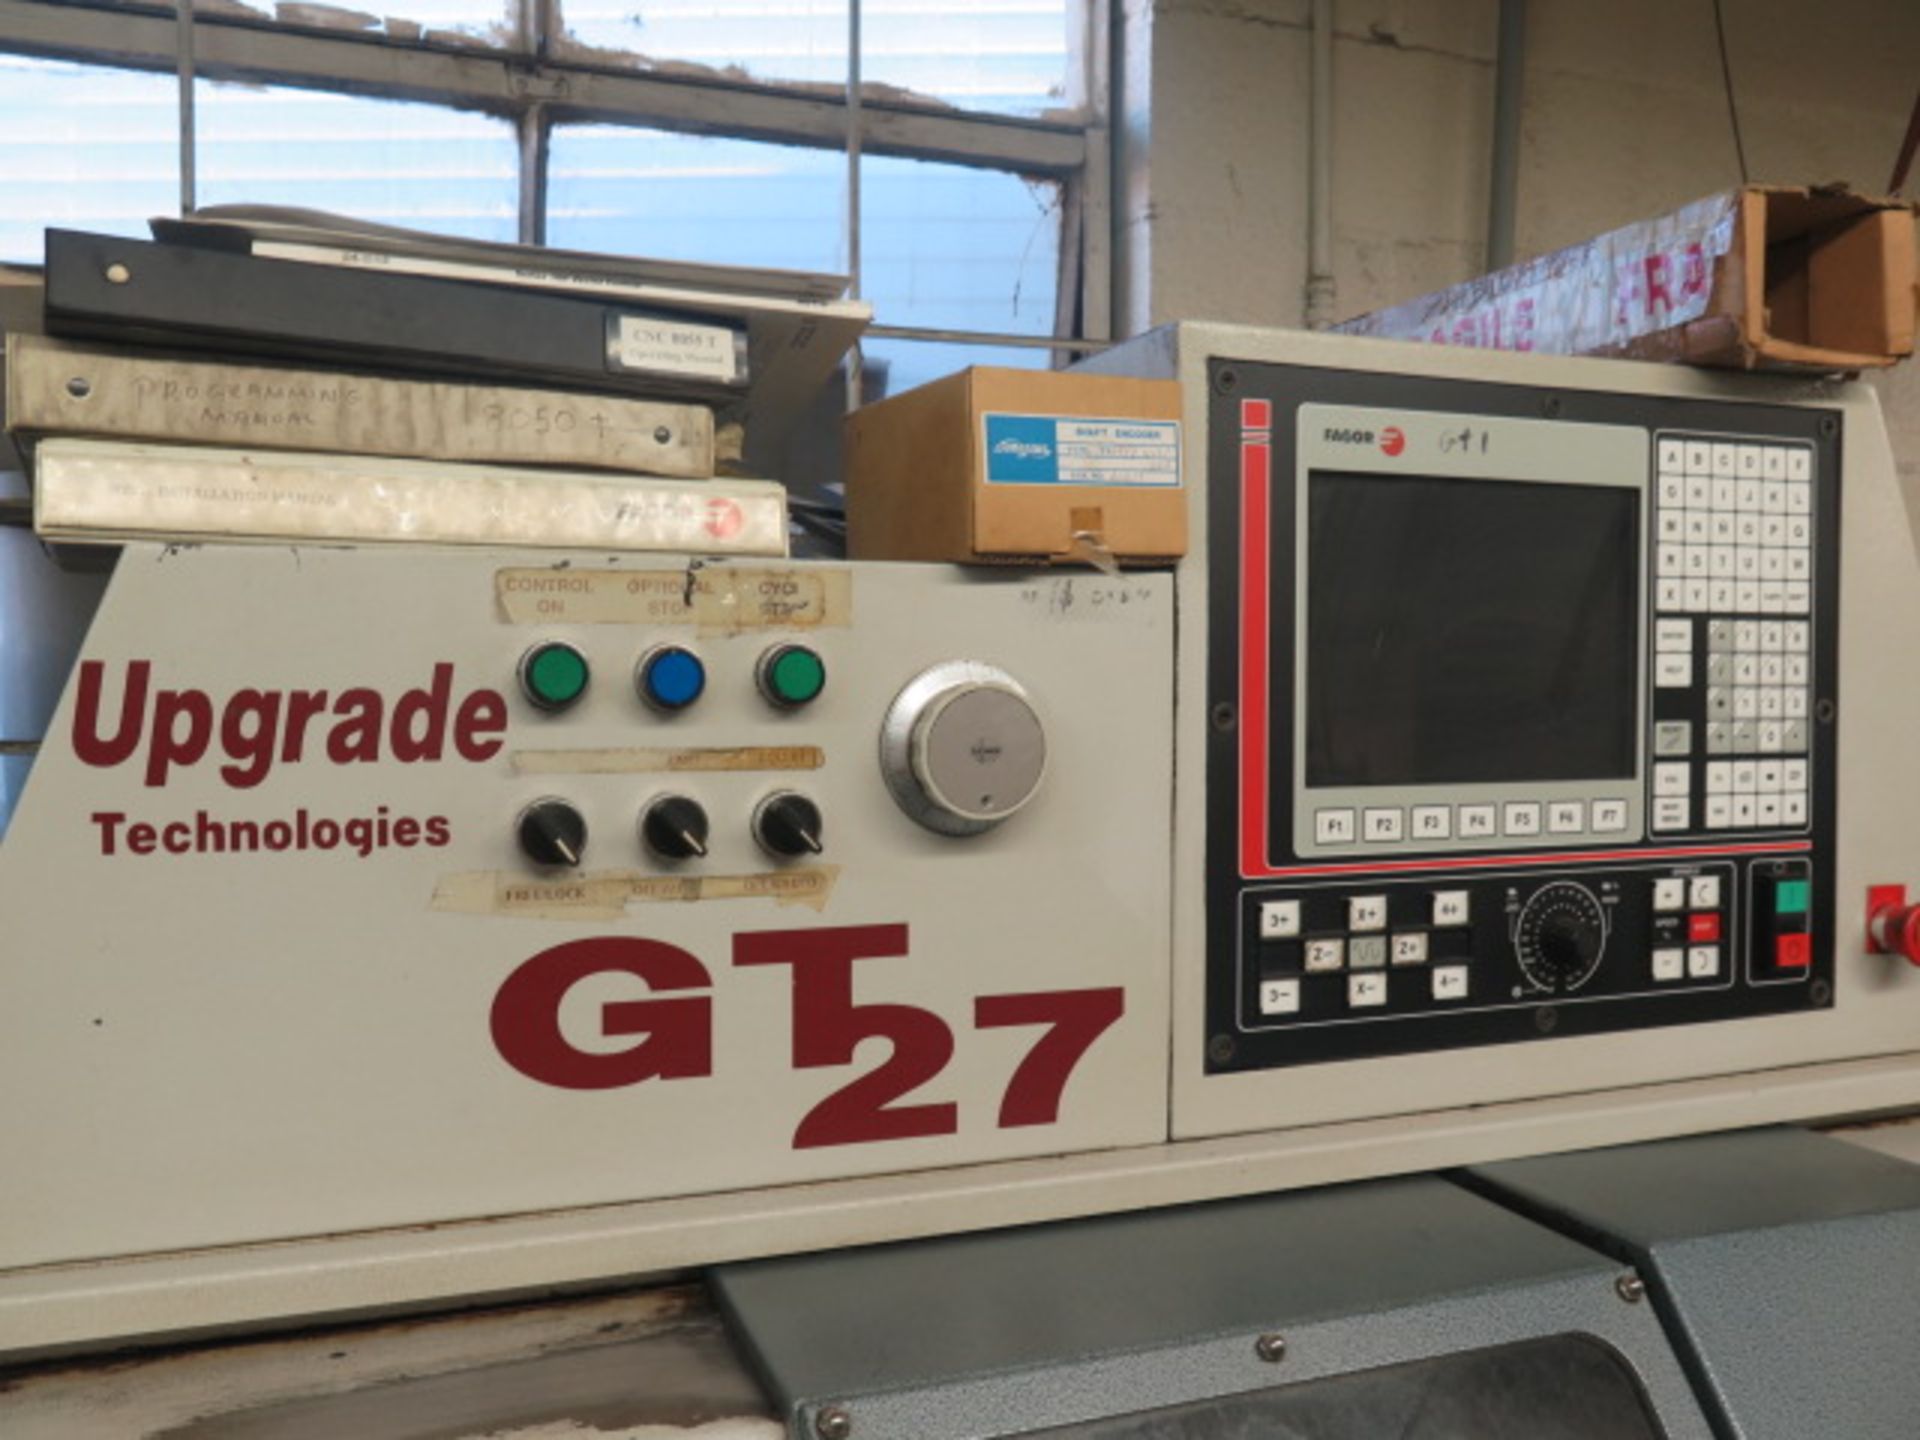 Upgrade Technologies “Compact GT27” CNC Cross Slide Lathe s/n DC572053E w/ Upgraded 8” Fagor - Image 7 of 13